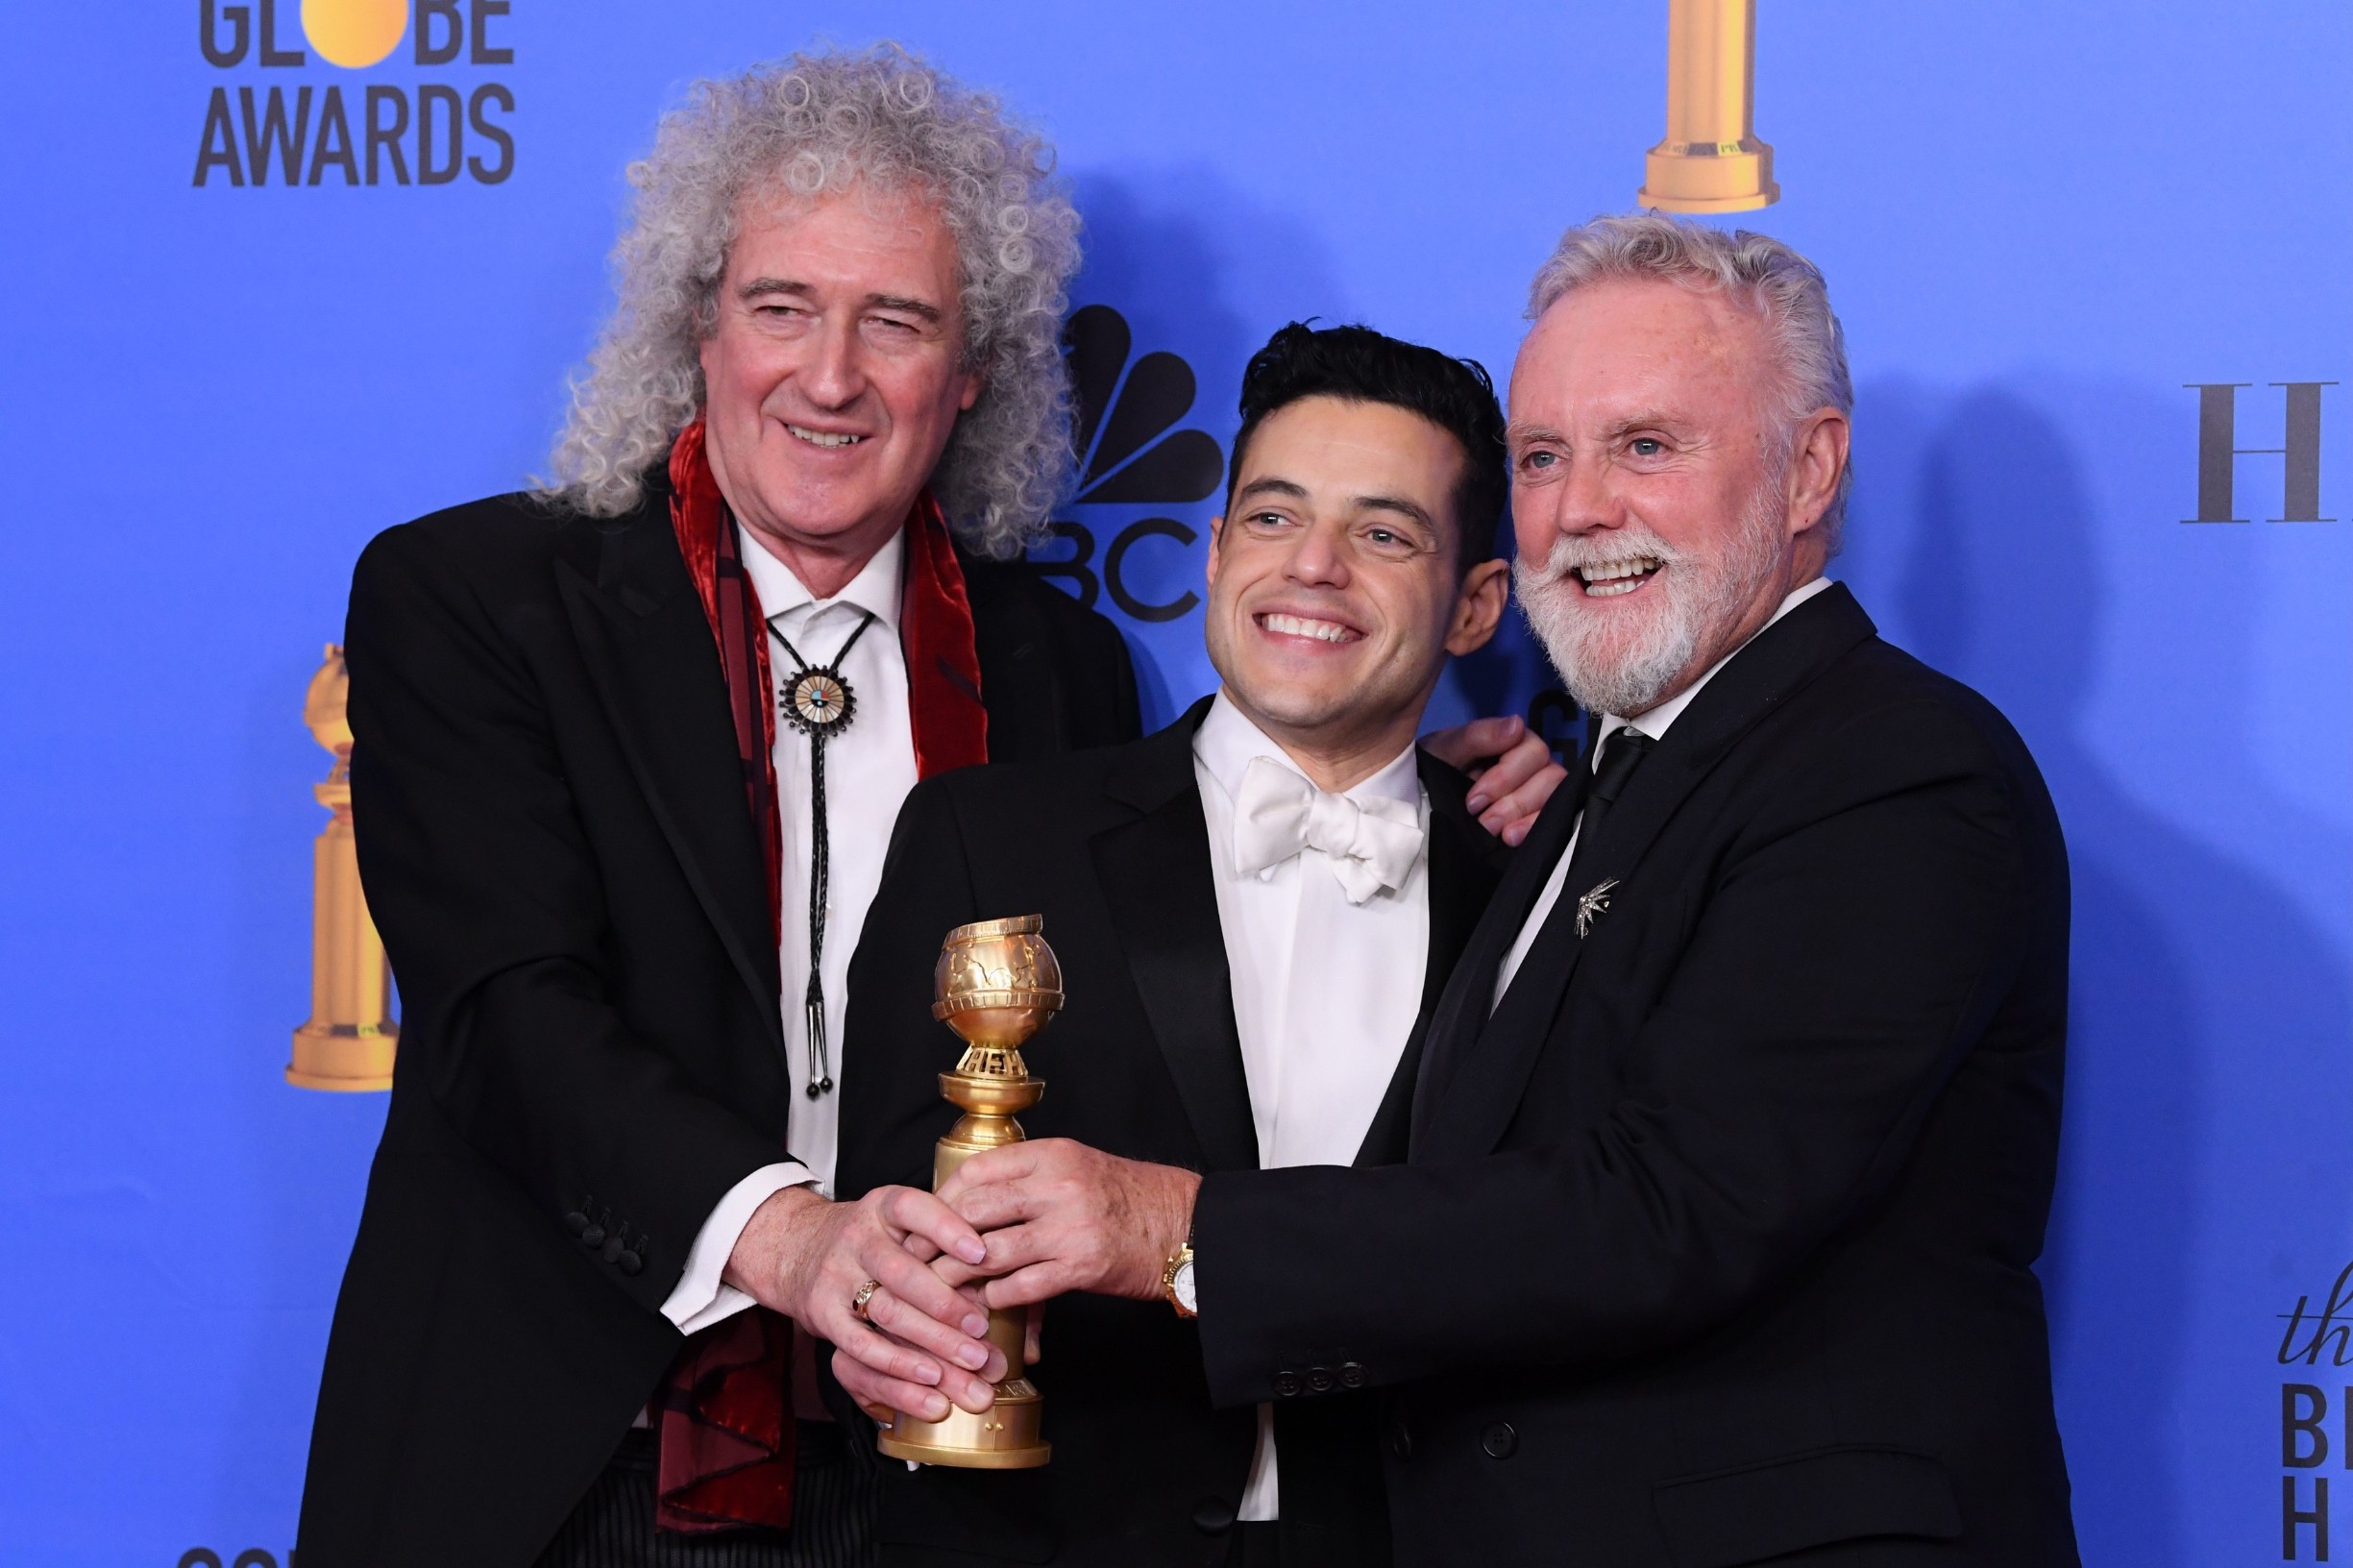 Brian May, Rami Malek and Roger Taylor - Best Motion Picture, Drama - 'Bohemian Rhapsody'
76th Annual Golden Globe Awards, Press Room, Los Angeles, USA - 06 Jan 2019, Image: 405648785, License: Rights-managed, Restrictions: , Model Release: no, Credit line: David Fisher / Shutterstock Editorial / Profimedia